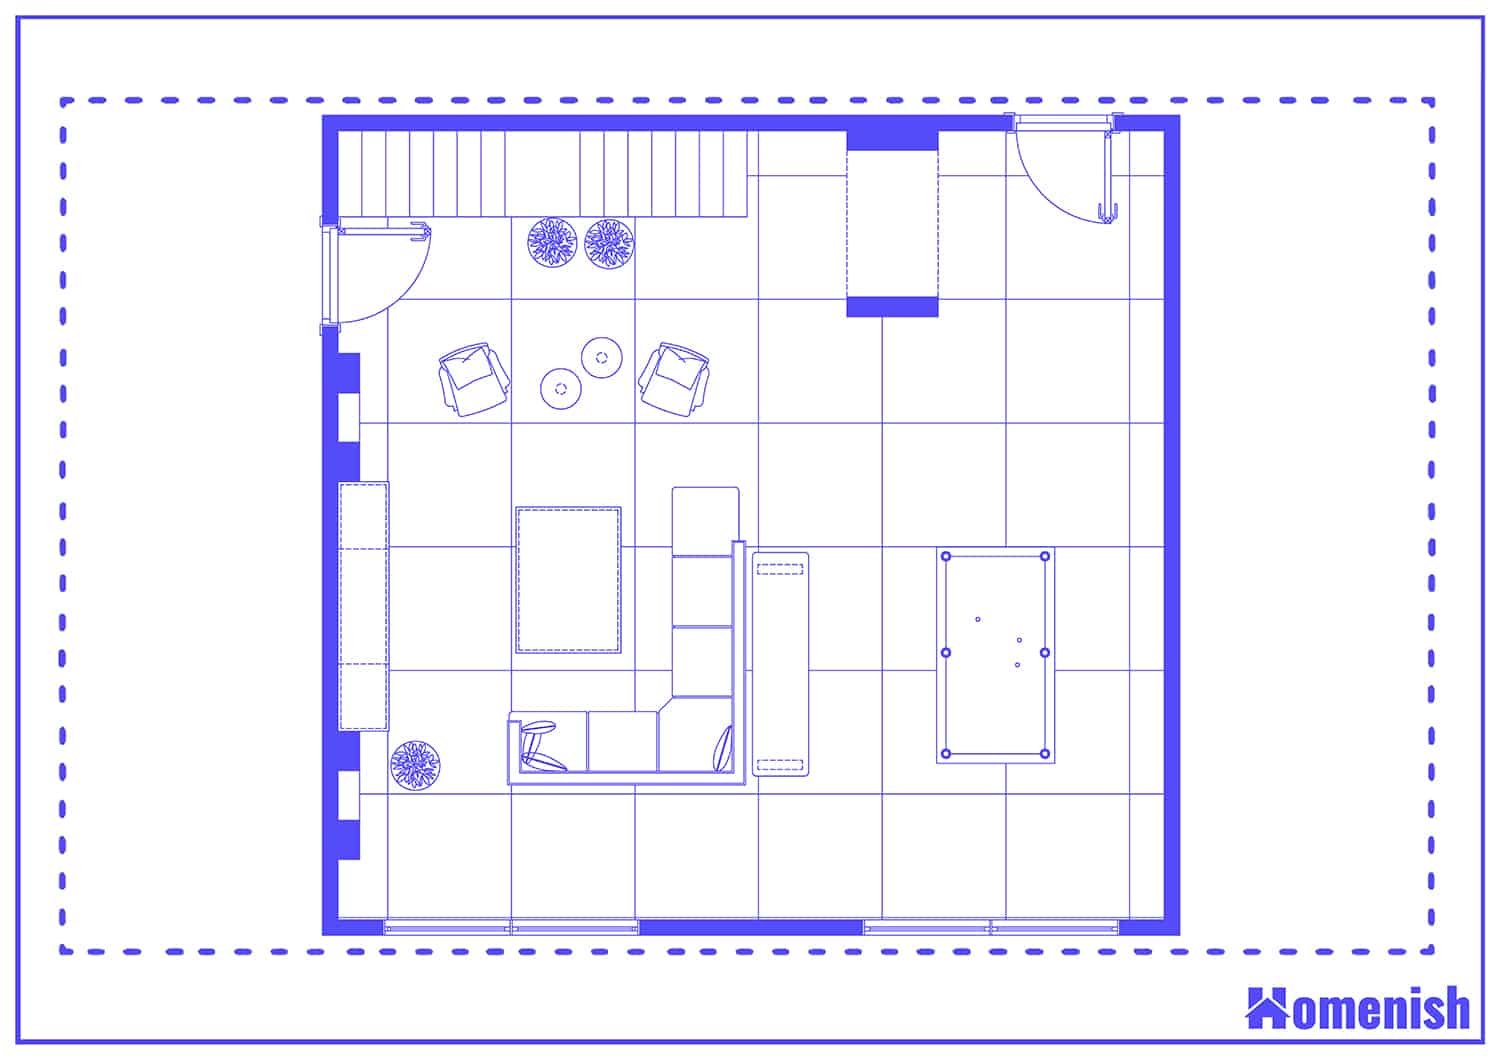 Sectioned Entertainment Room Layout